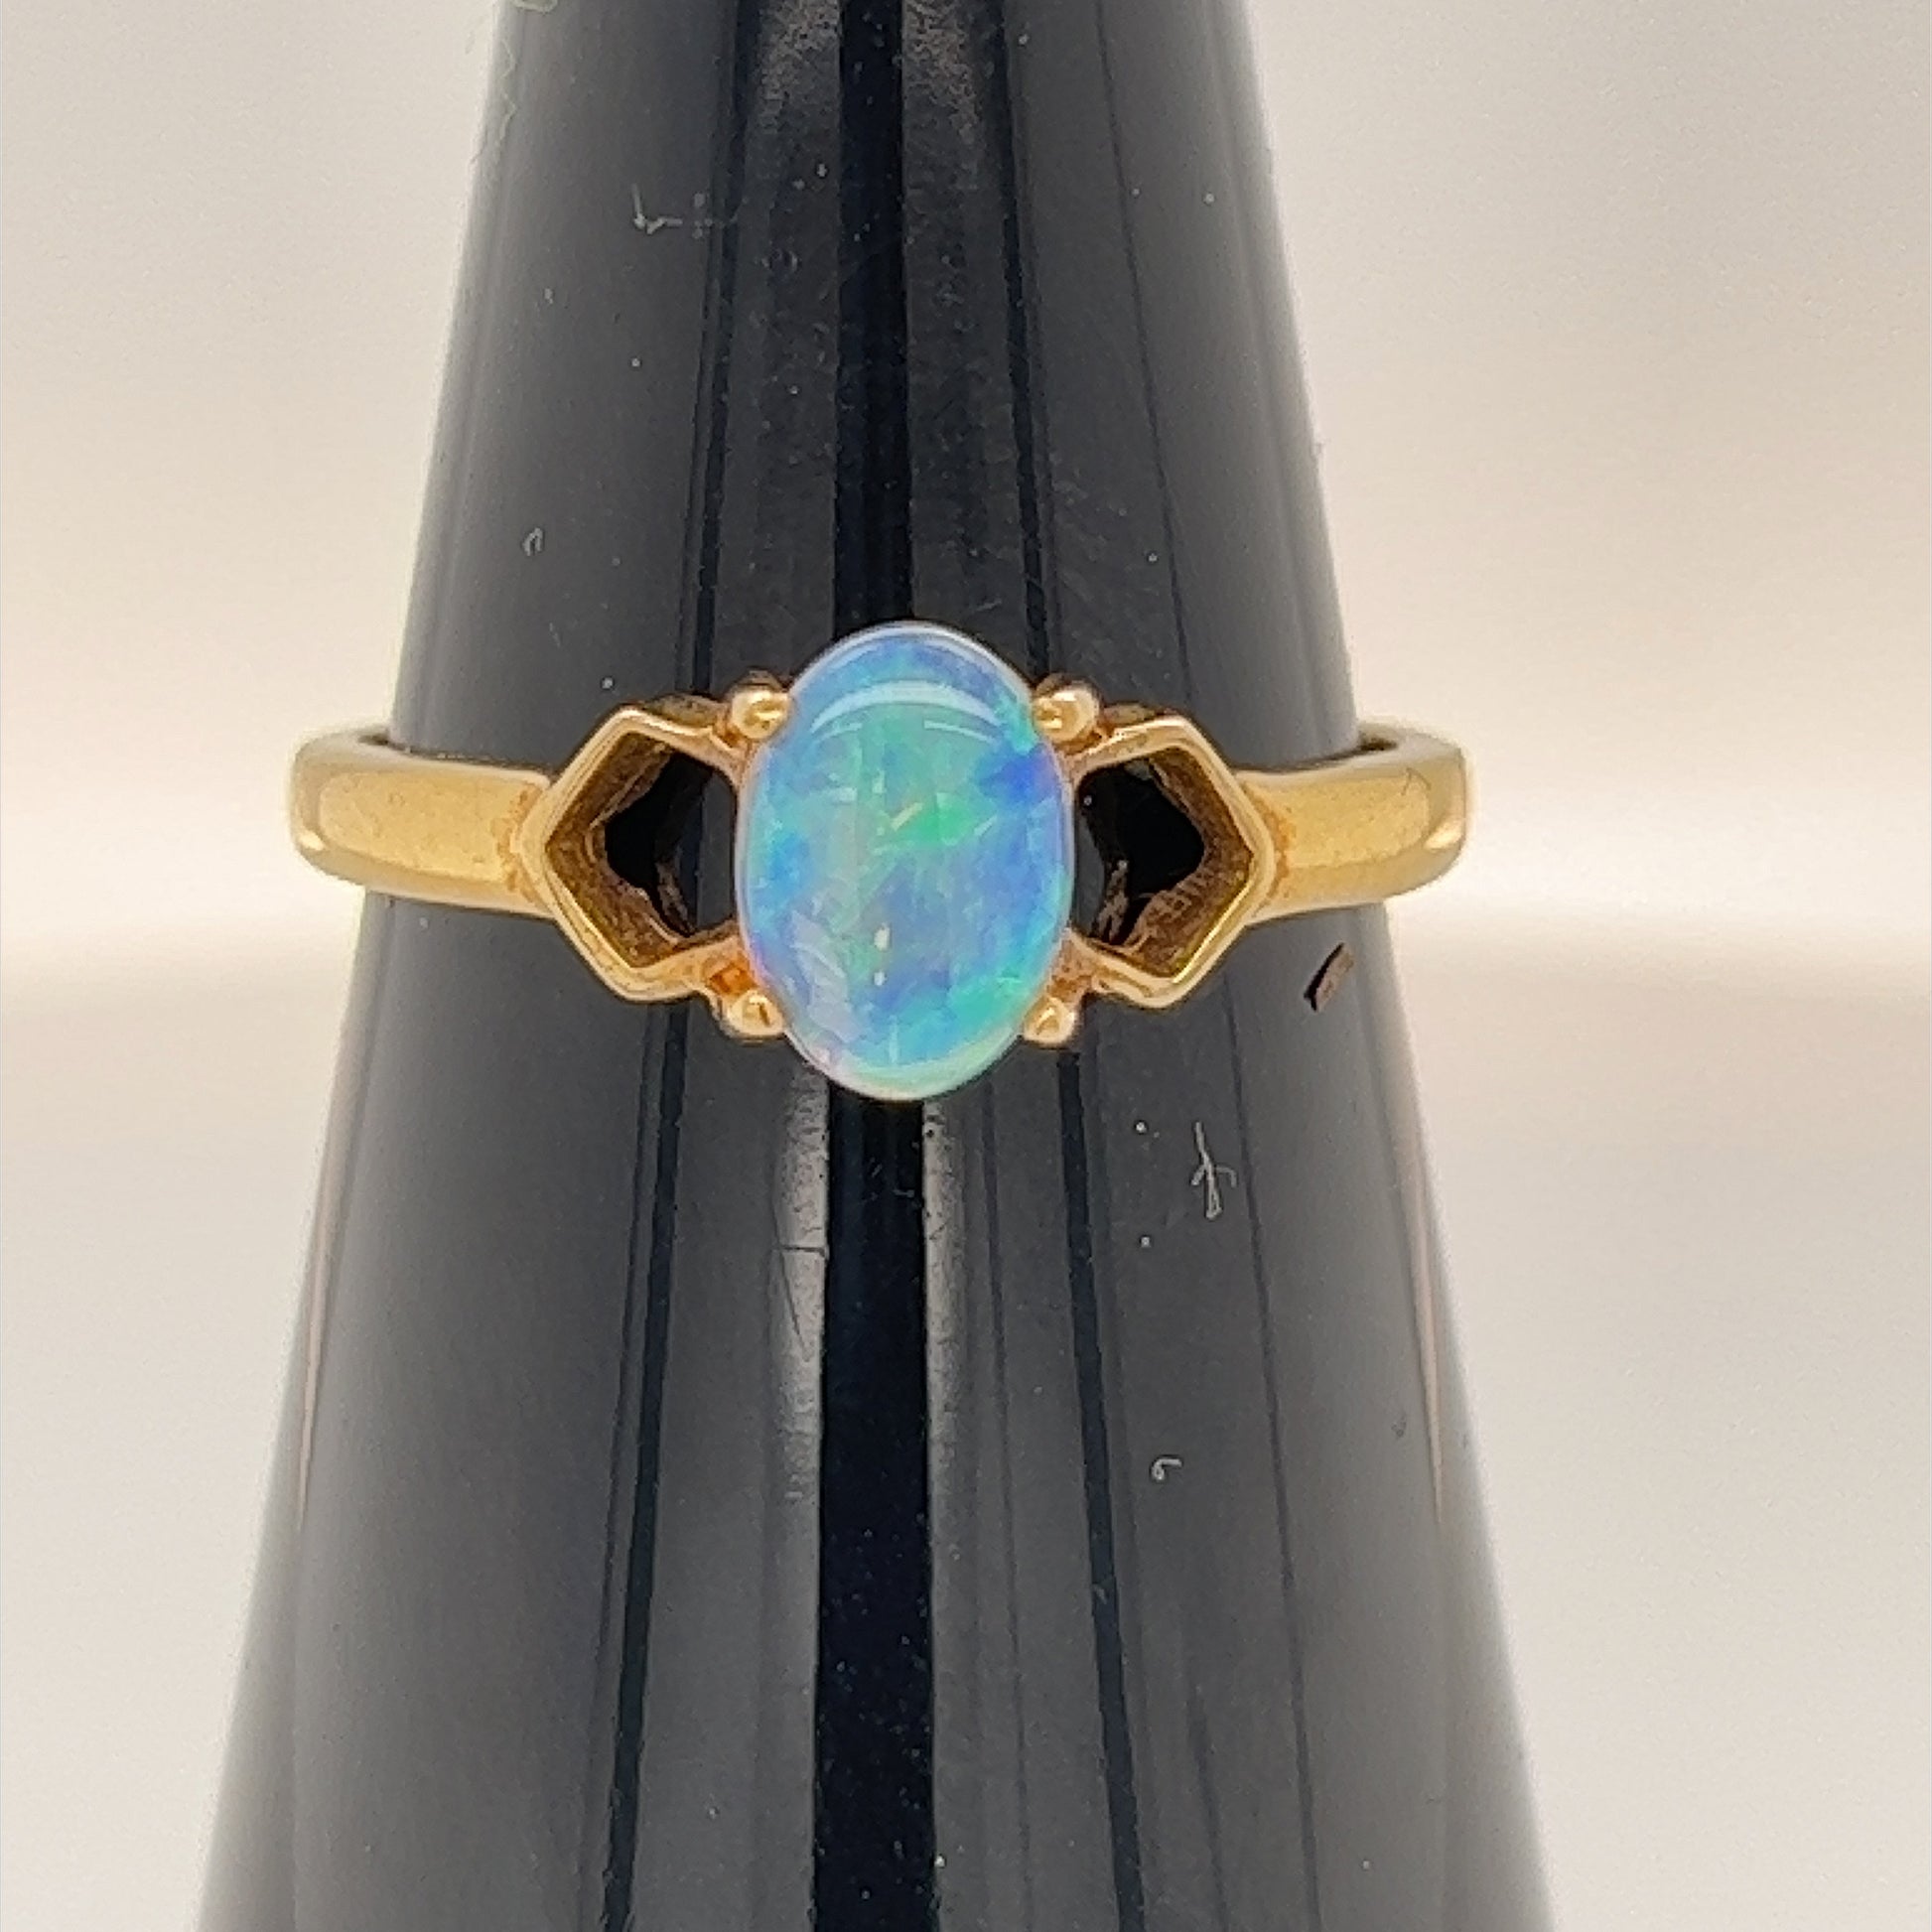 Nice small 14ct gold opal ring featuring a perfectly cut green crystal opal from Coober Pedy. Great colour.